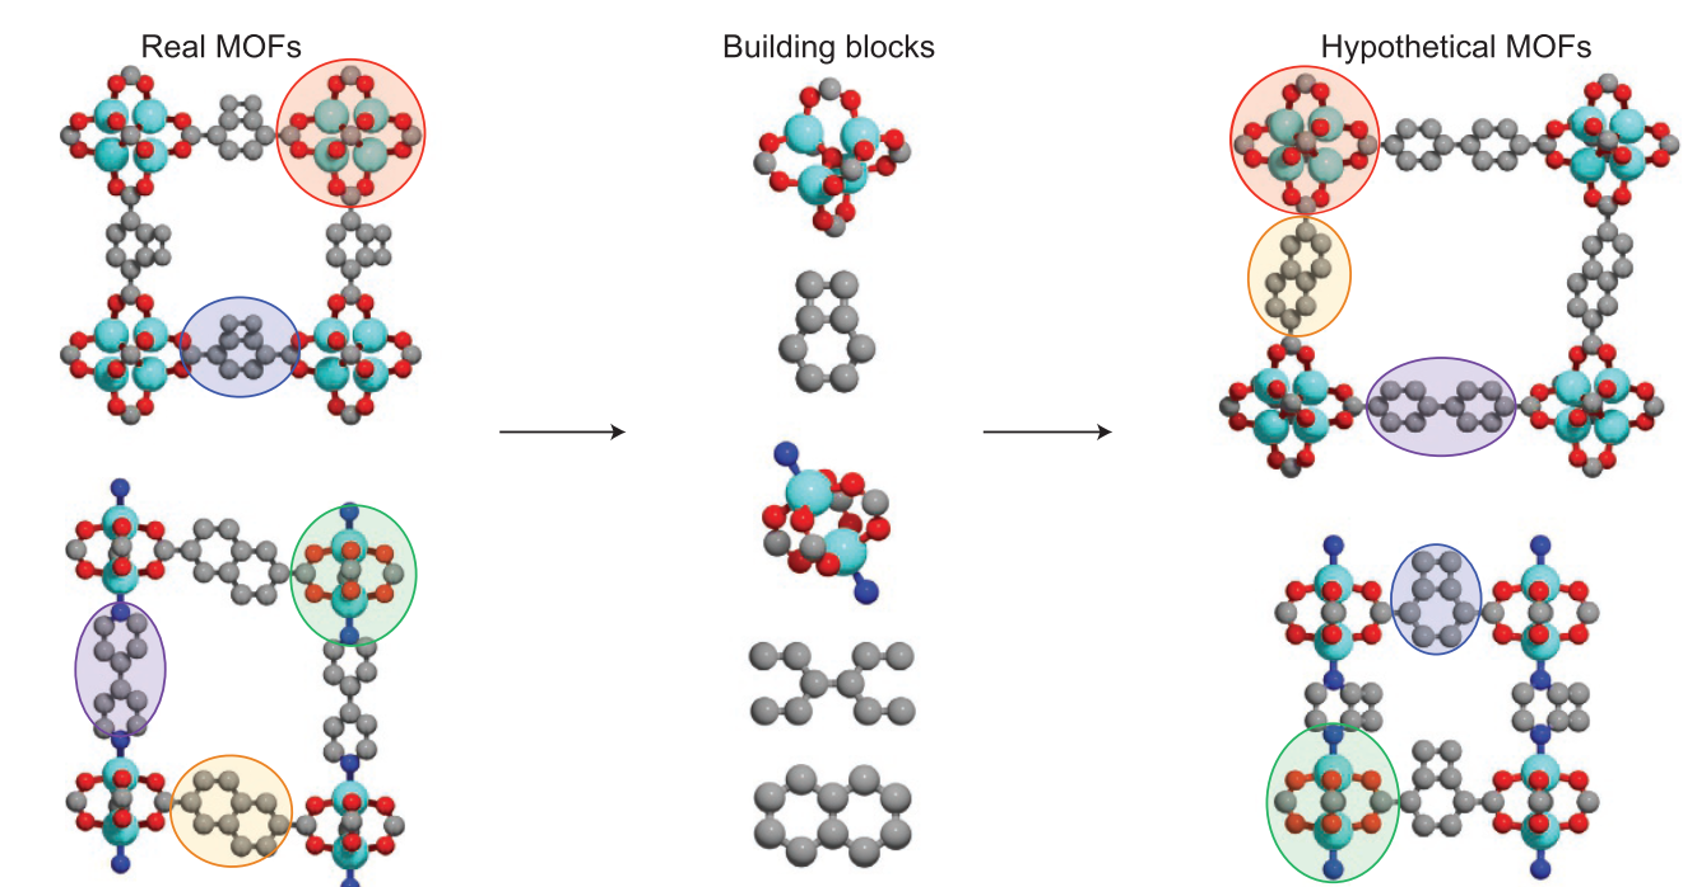 Hypothetical MOFs from real MOF building blocks